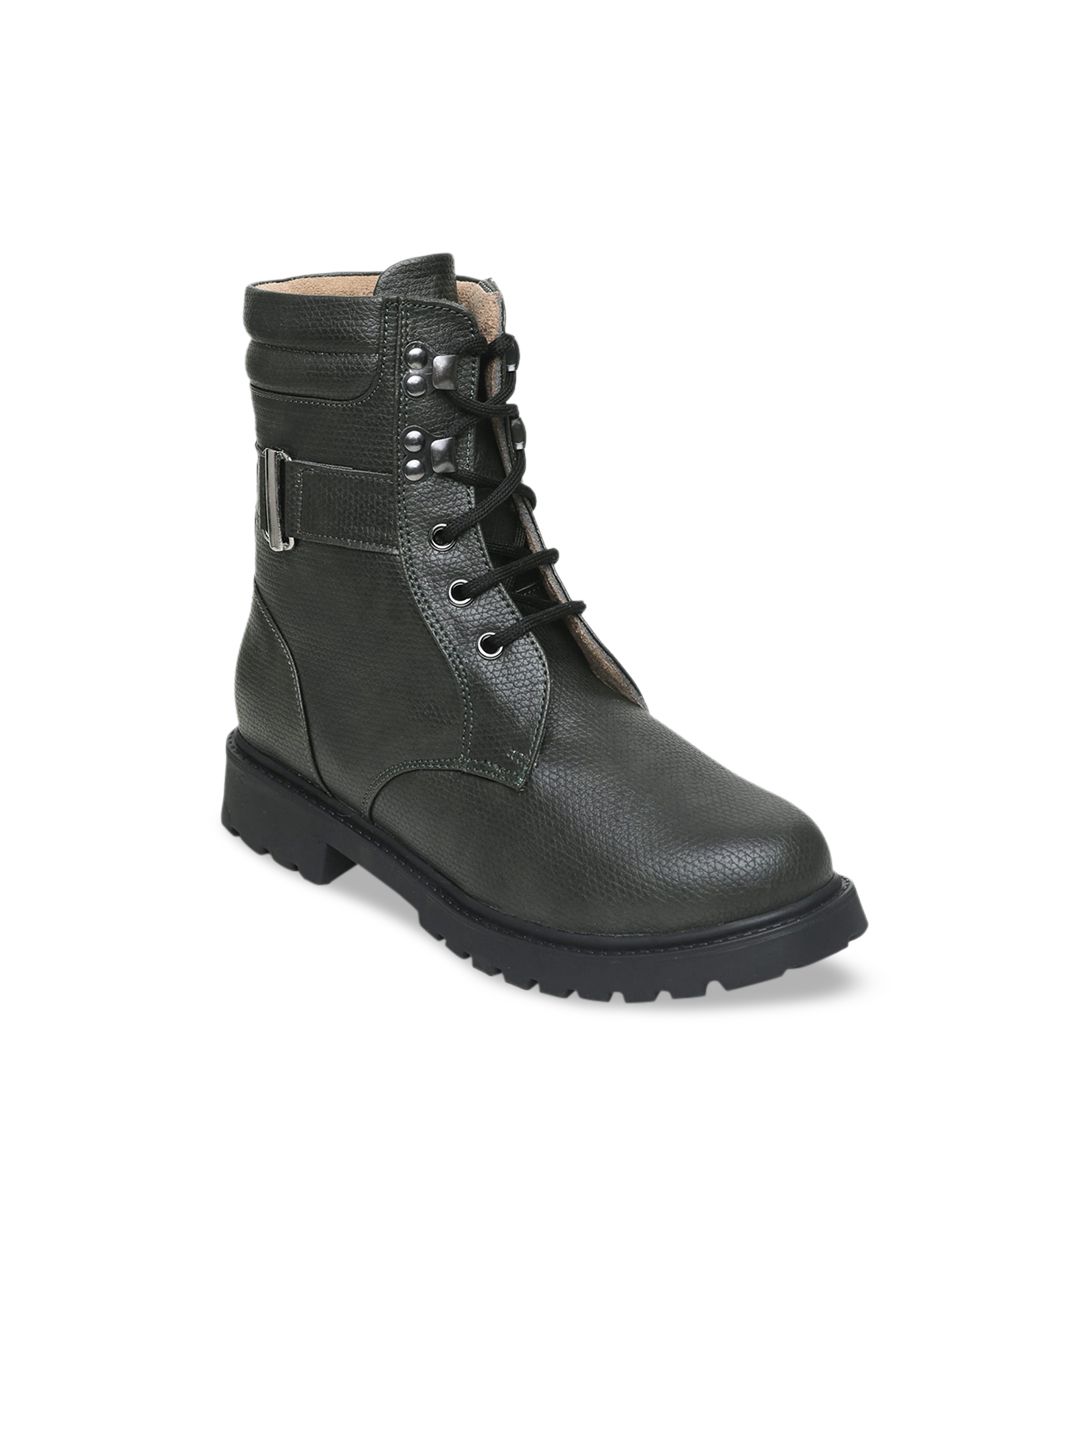 VALIOSAA Women Olive Green High-Top Block Heeled Boots Price in India